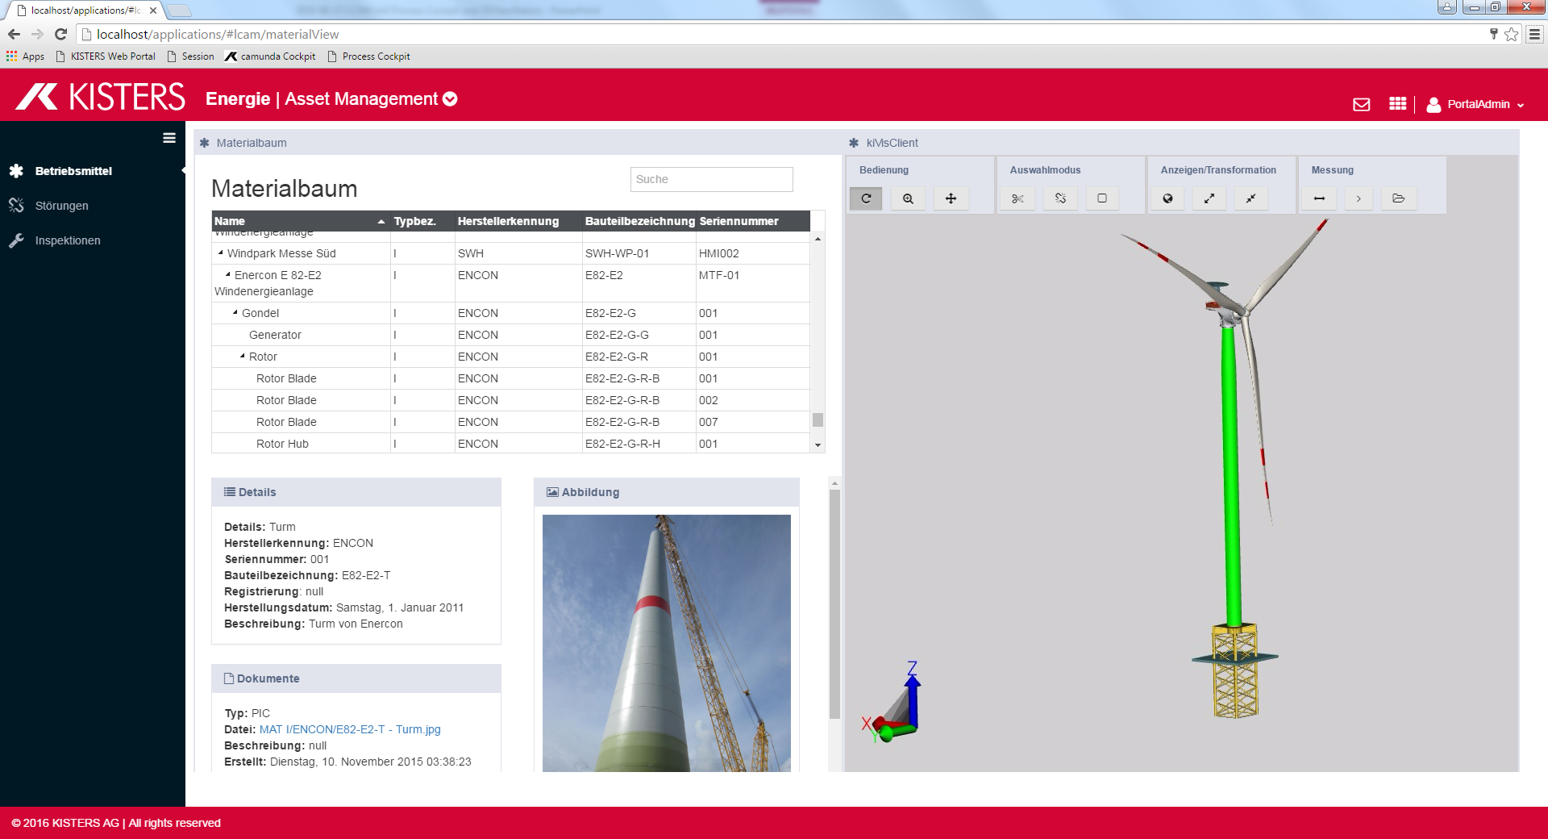 Adding 3D to a lWeb based ife cycle management, MRO, after sales application